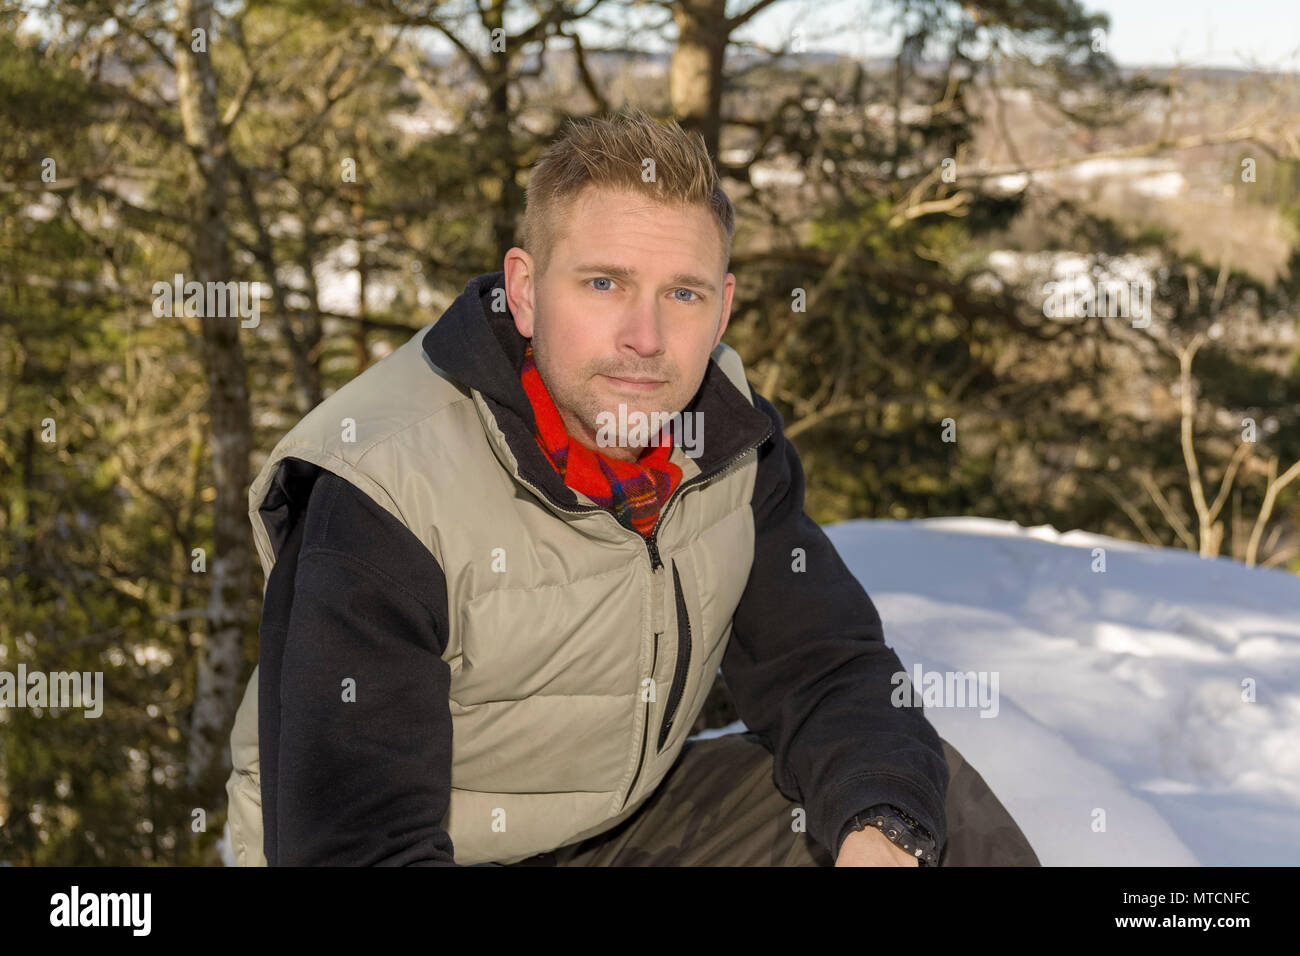 Portrait of mid adult 40s caucasian man sitting down outdoors in snow in winter looking at camera smiling Stock Photo